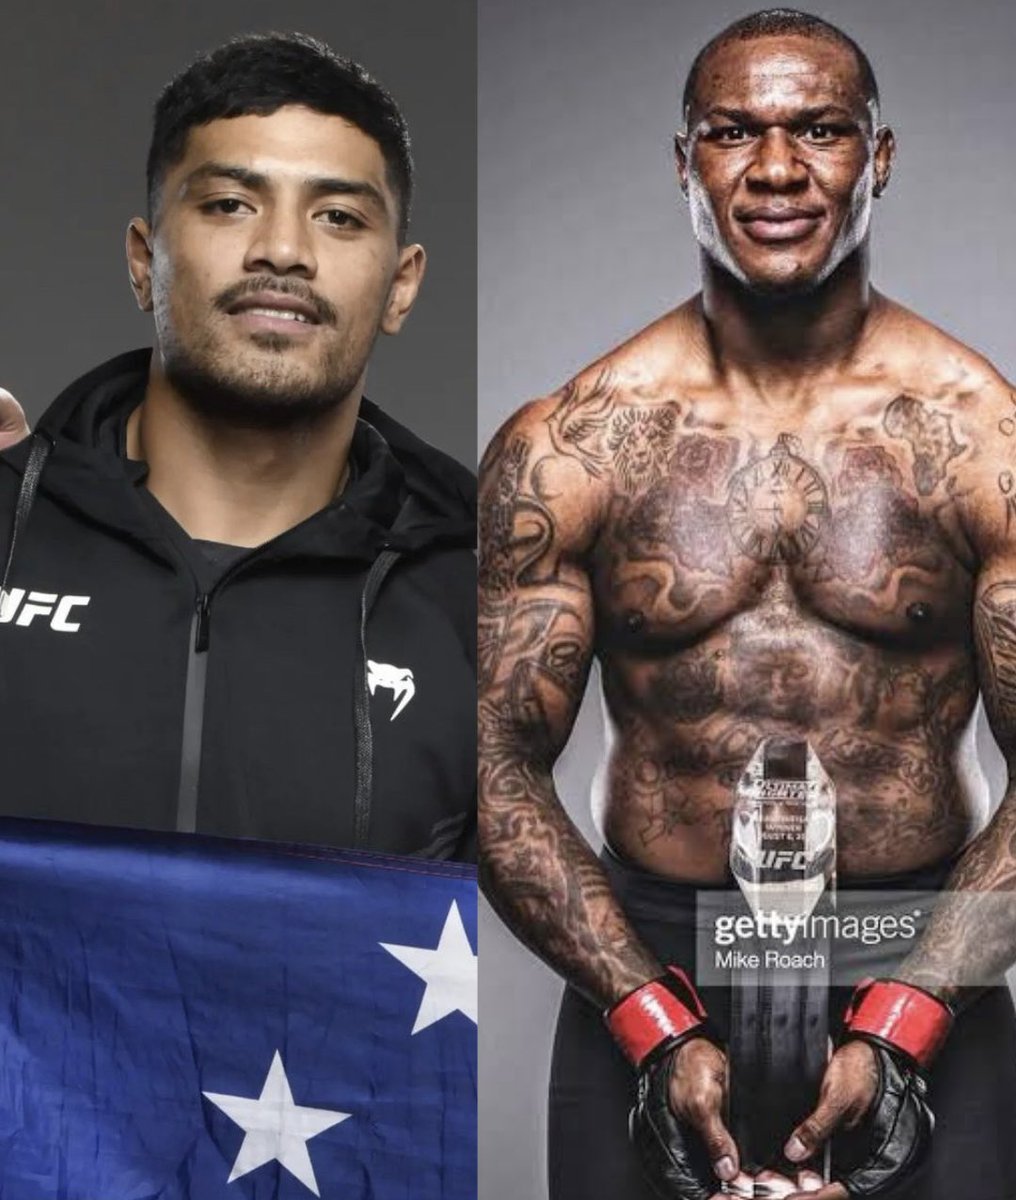 BREAKING NEWS: Junior Tafa set to make his UFC debut April 23rd, against Mohamed Usman who is also set to make his UFC debut. Both men have brothers currently fighting in the UFC (Justin Tafa, Kamaru Usman)